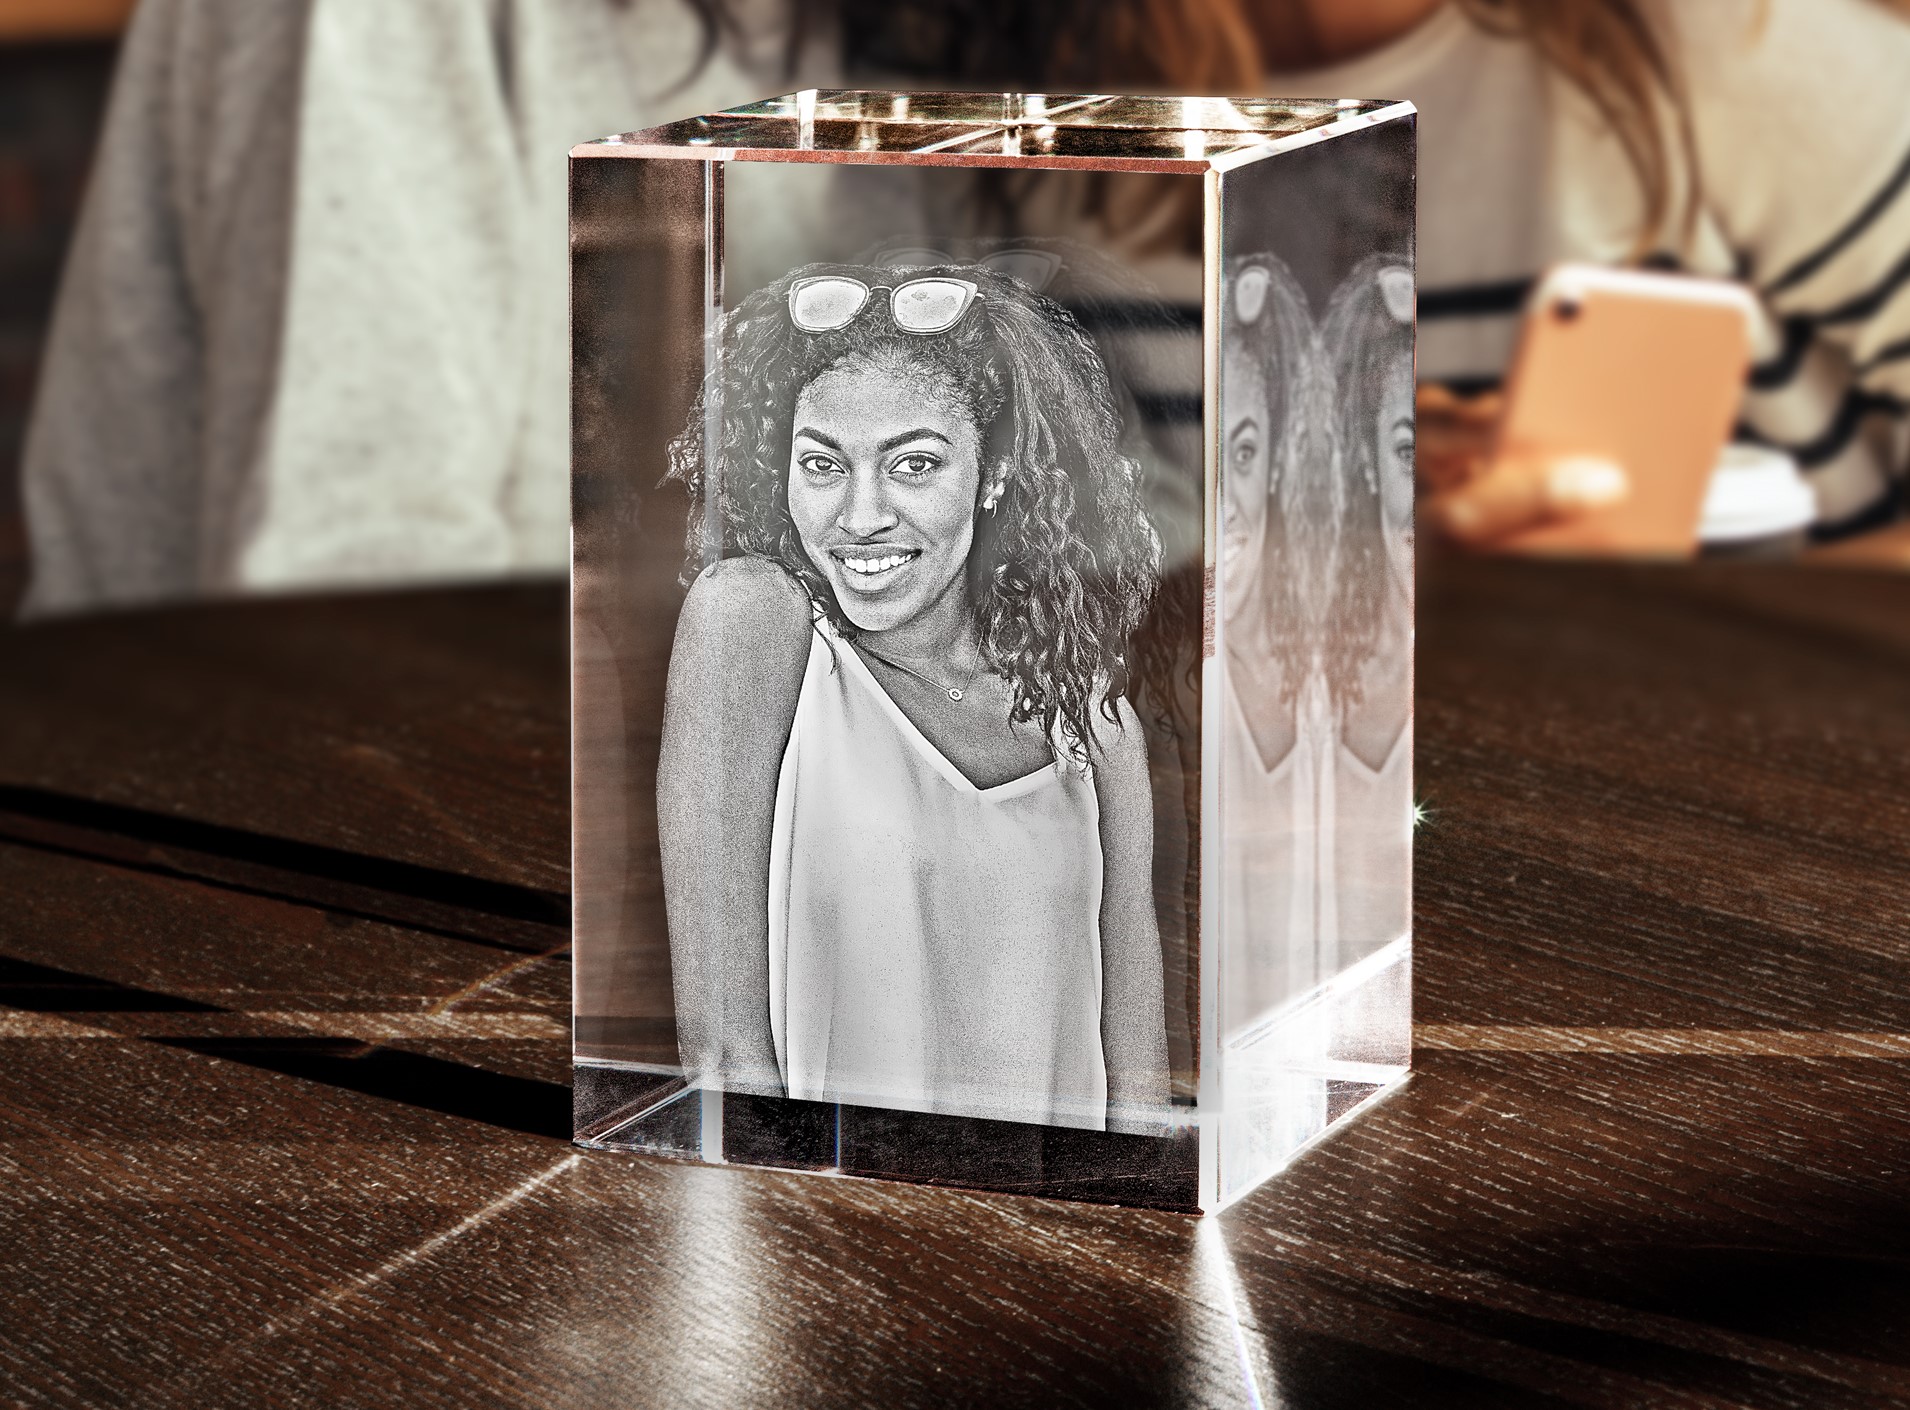 A woman surprises her friend with a 3D engraved photo crystal.